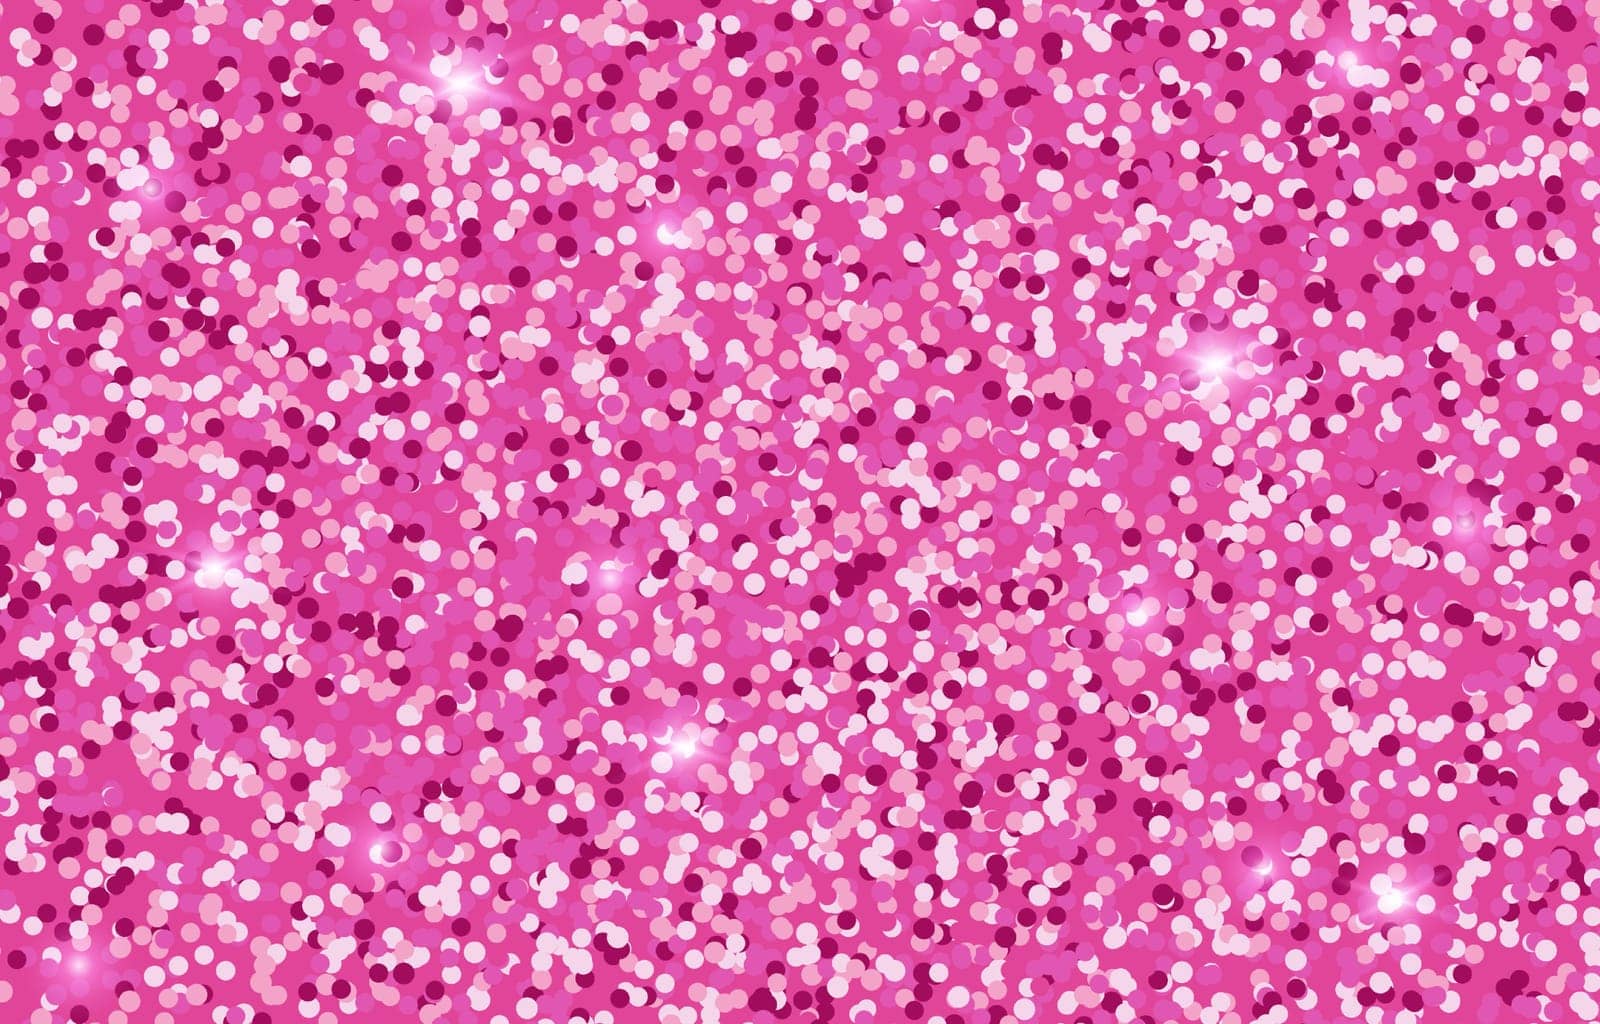 Pink glitter texture. Pink glitter background. For advertising, packaging, websites. Vector